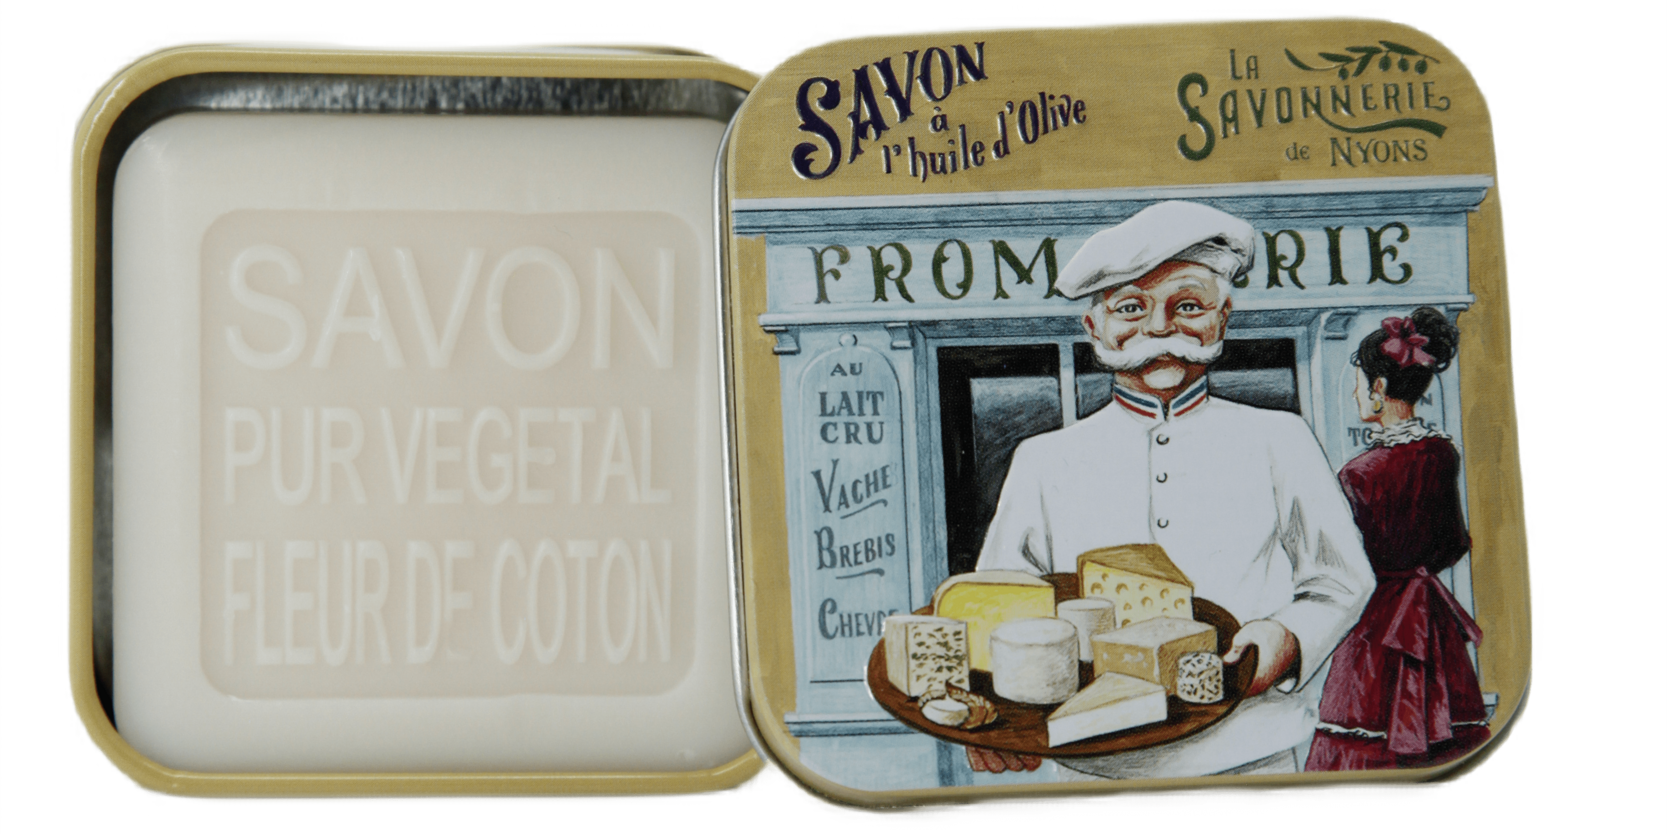 3.5oz Cotton Flower Soap in cheese maker Tin Box